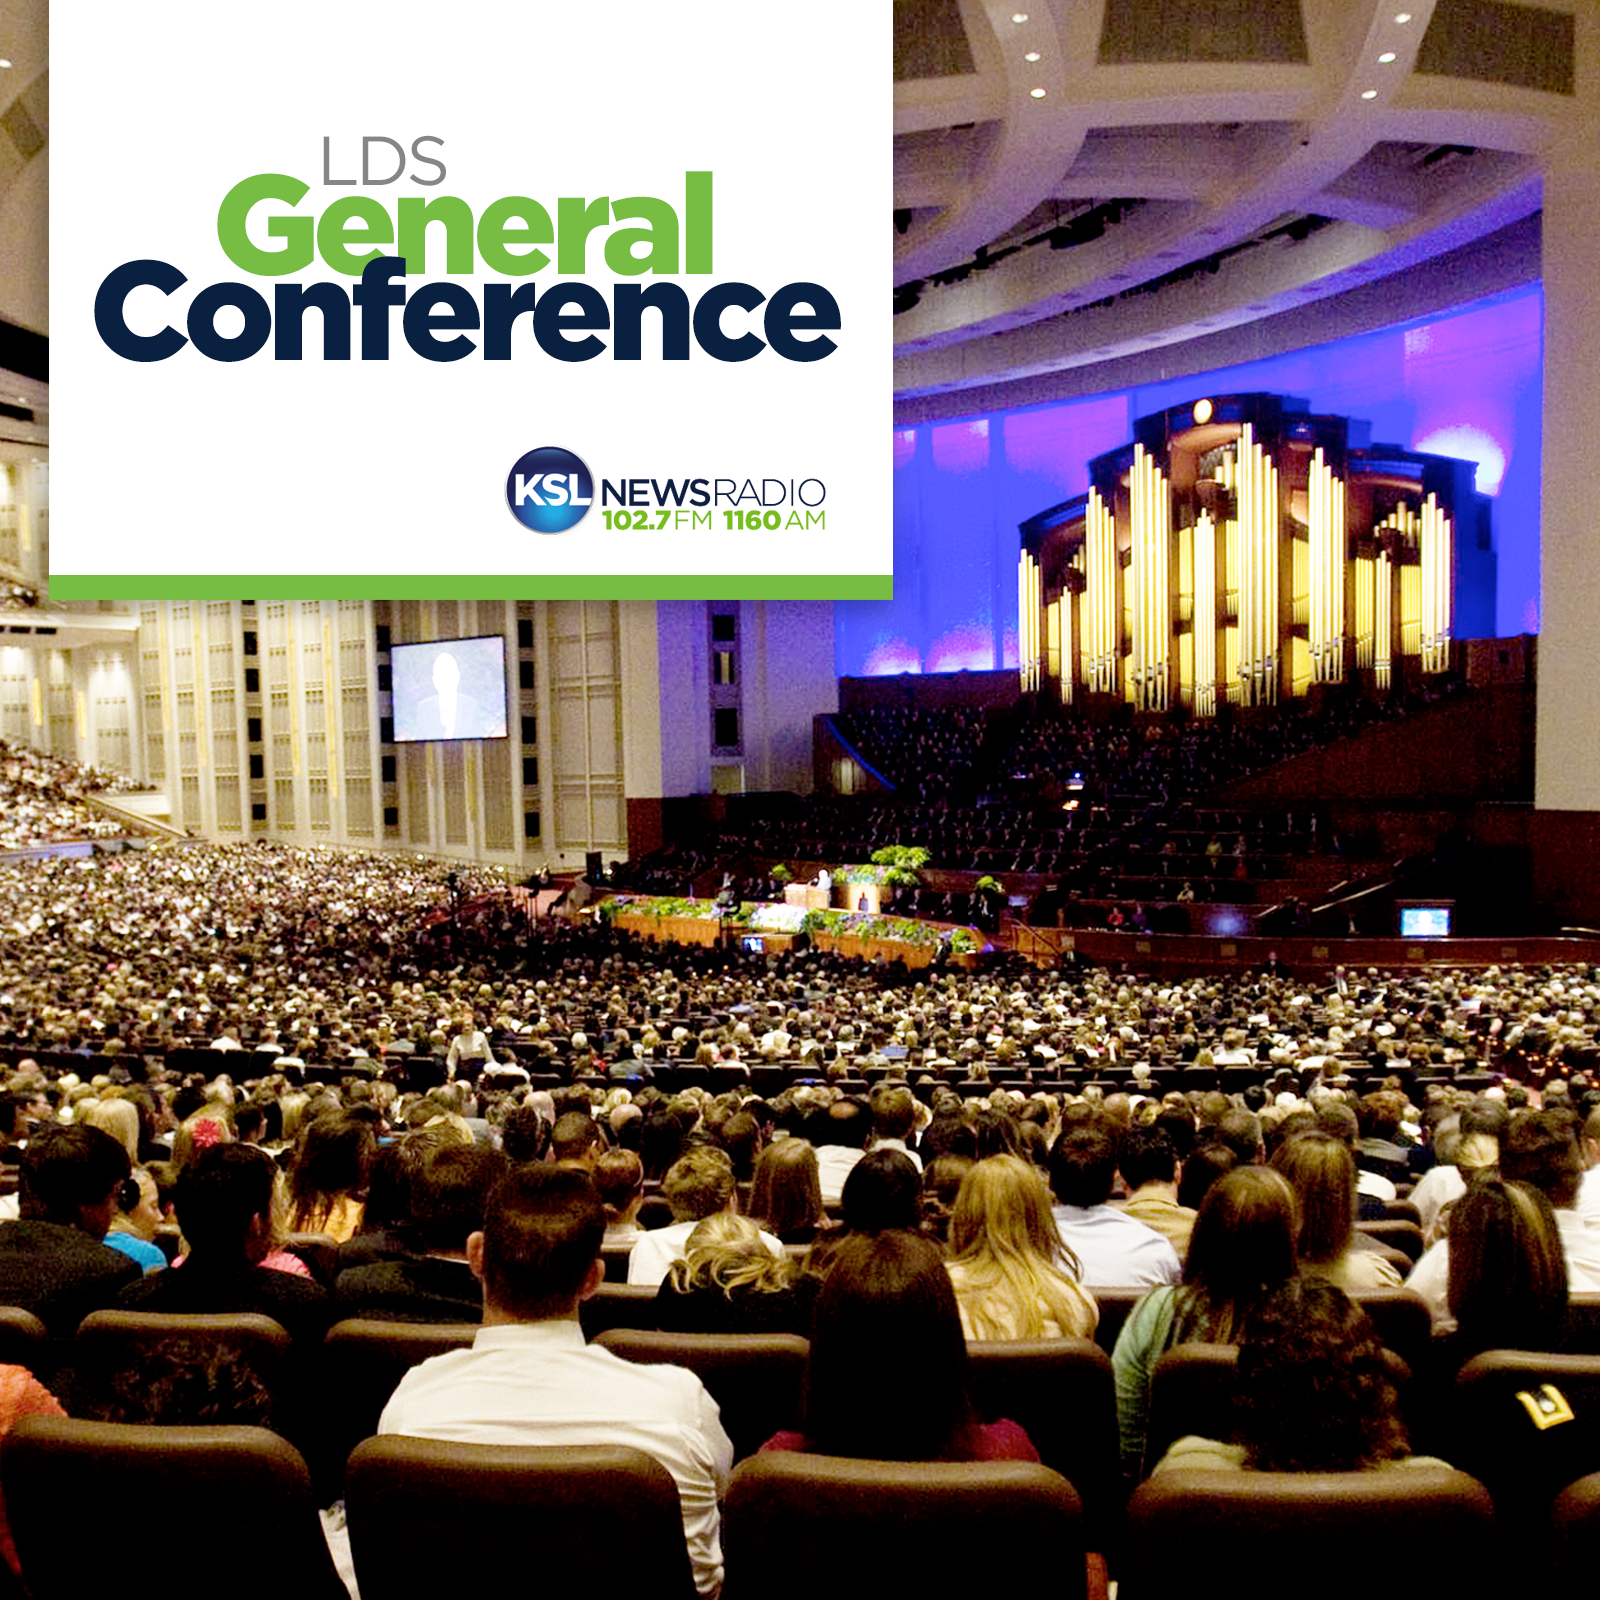 Saturday Morning Session of the 188th LDS General Conference, March 31, 2018